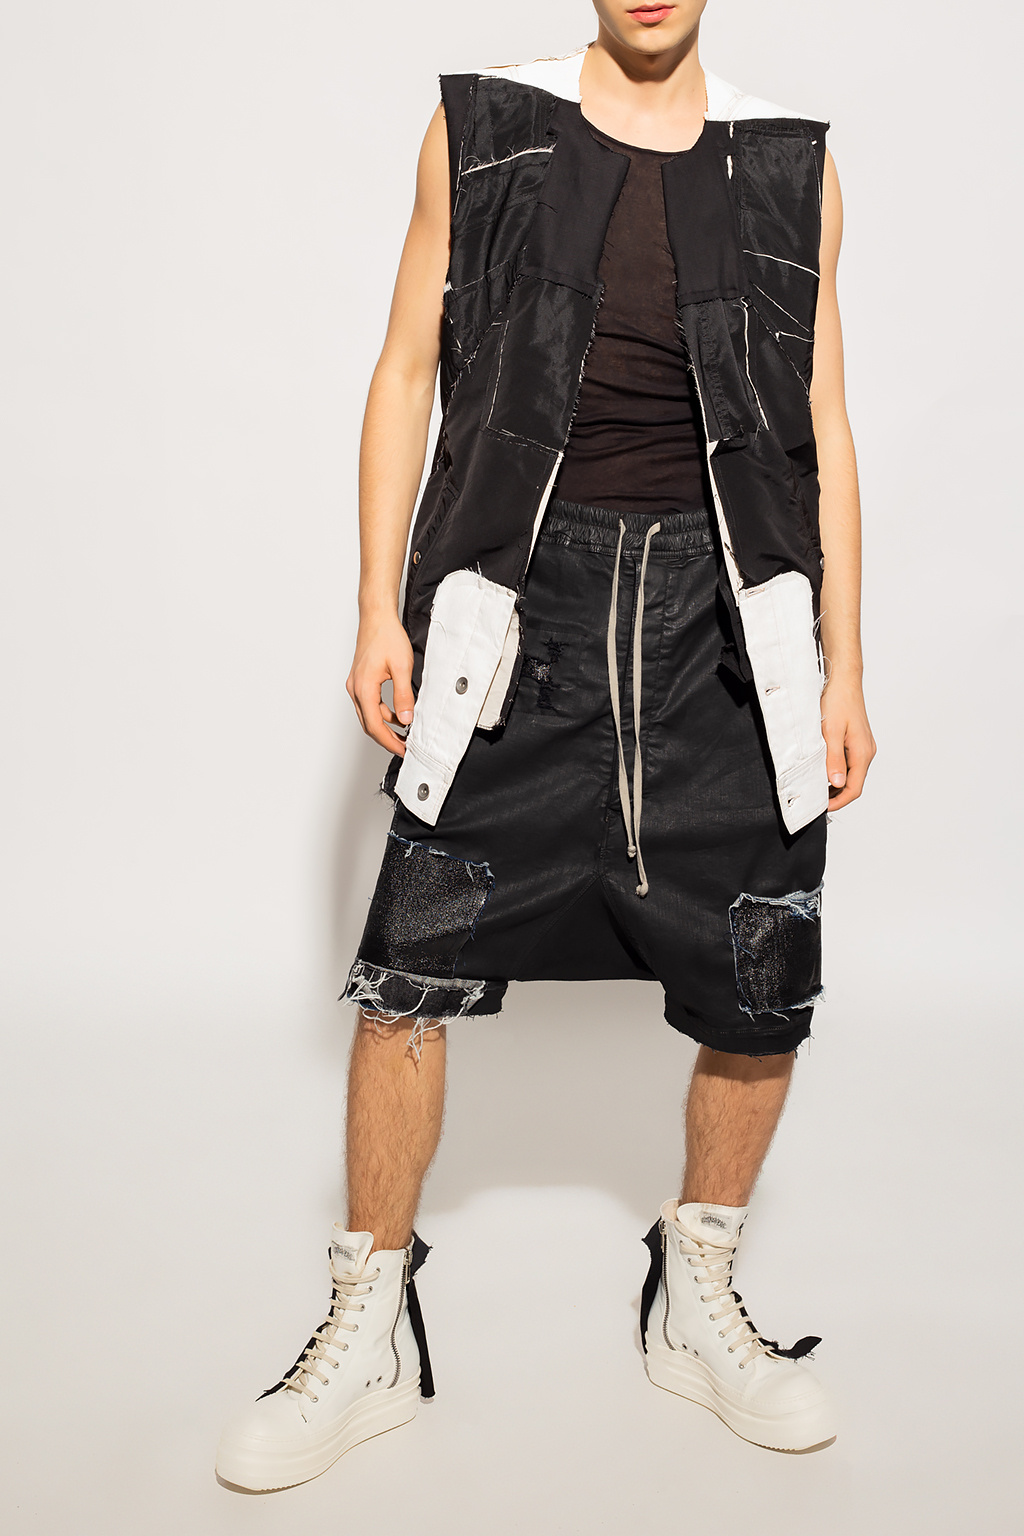 Rick Owens ‘Exclusive for SneakersbeShops’ shorts